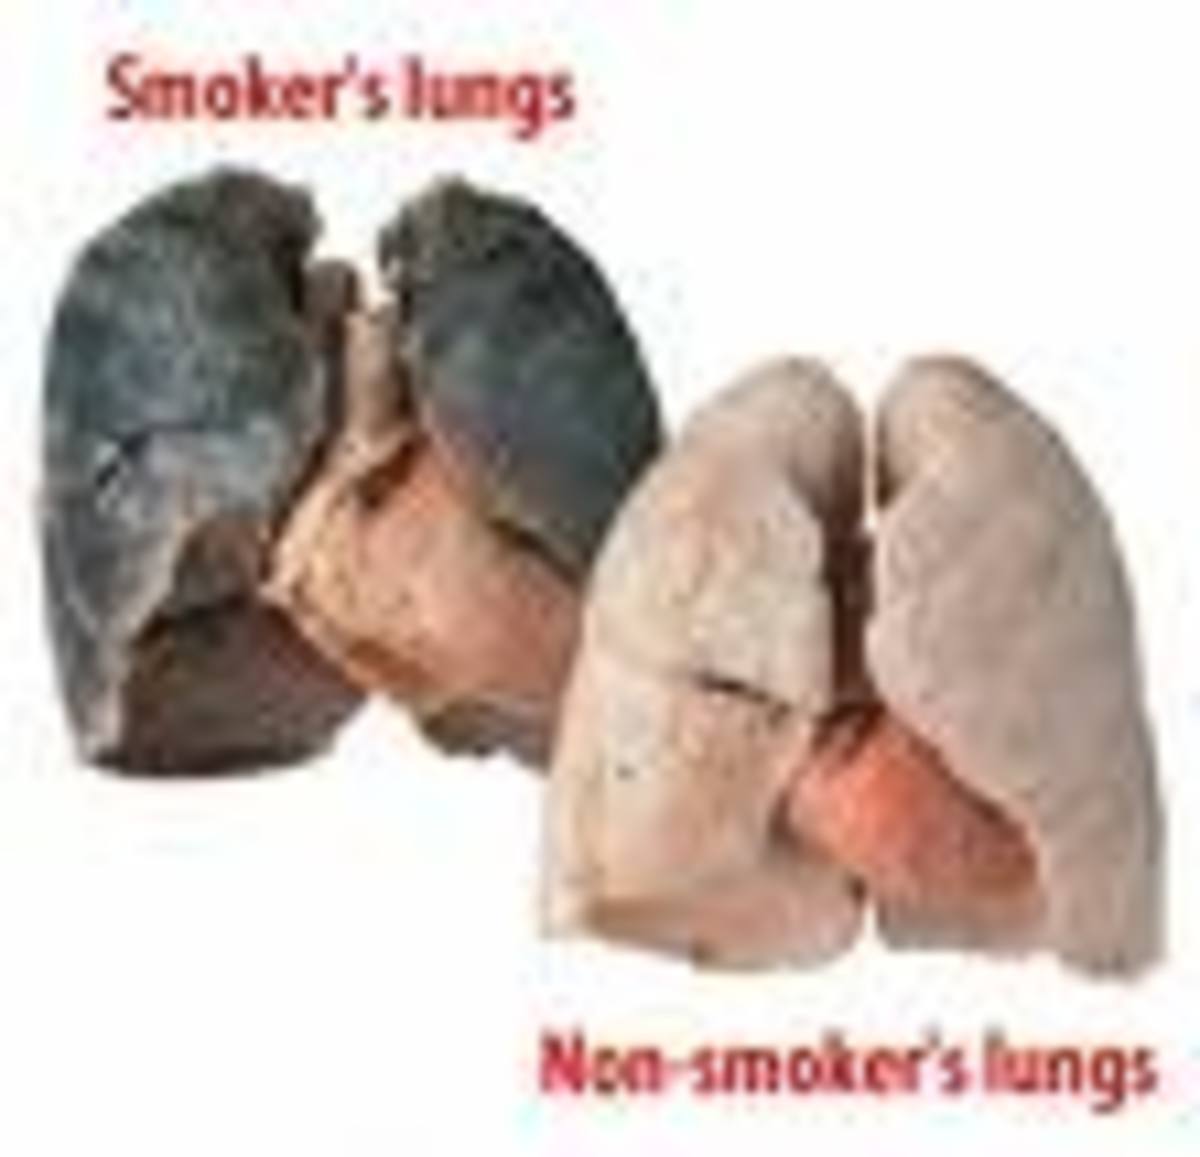 Smoker's Lungs and Non-Smoker's Lungs.